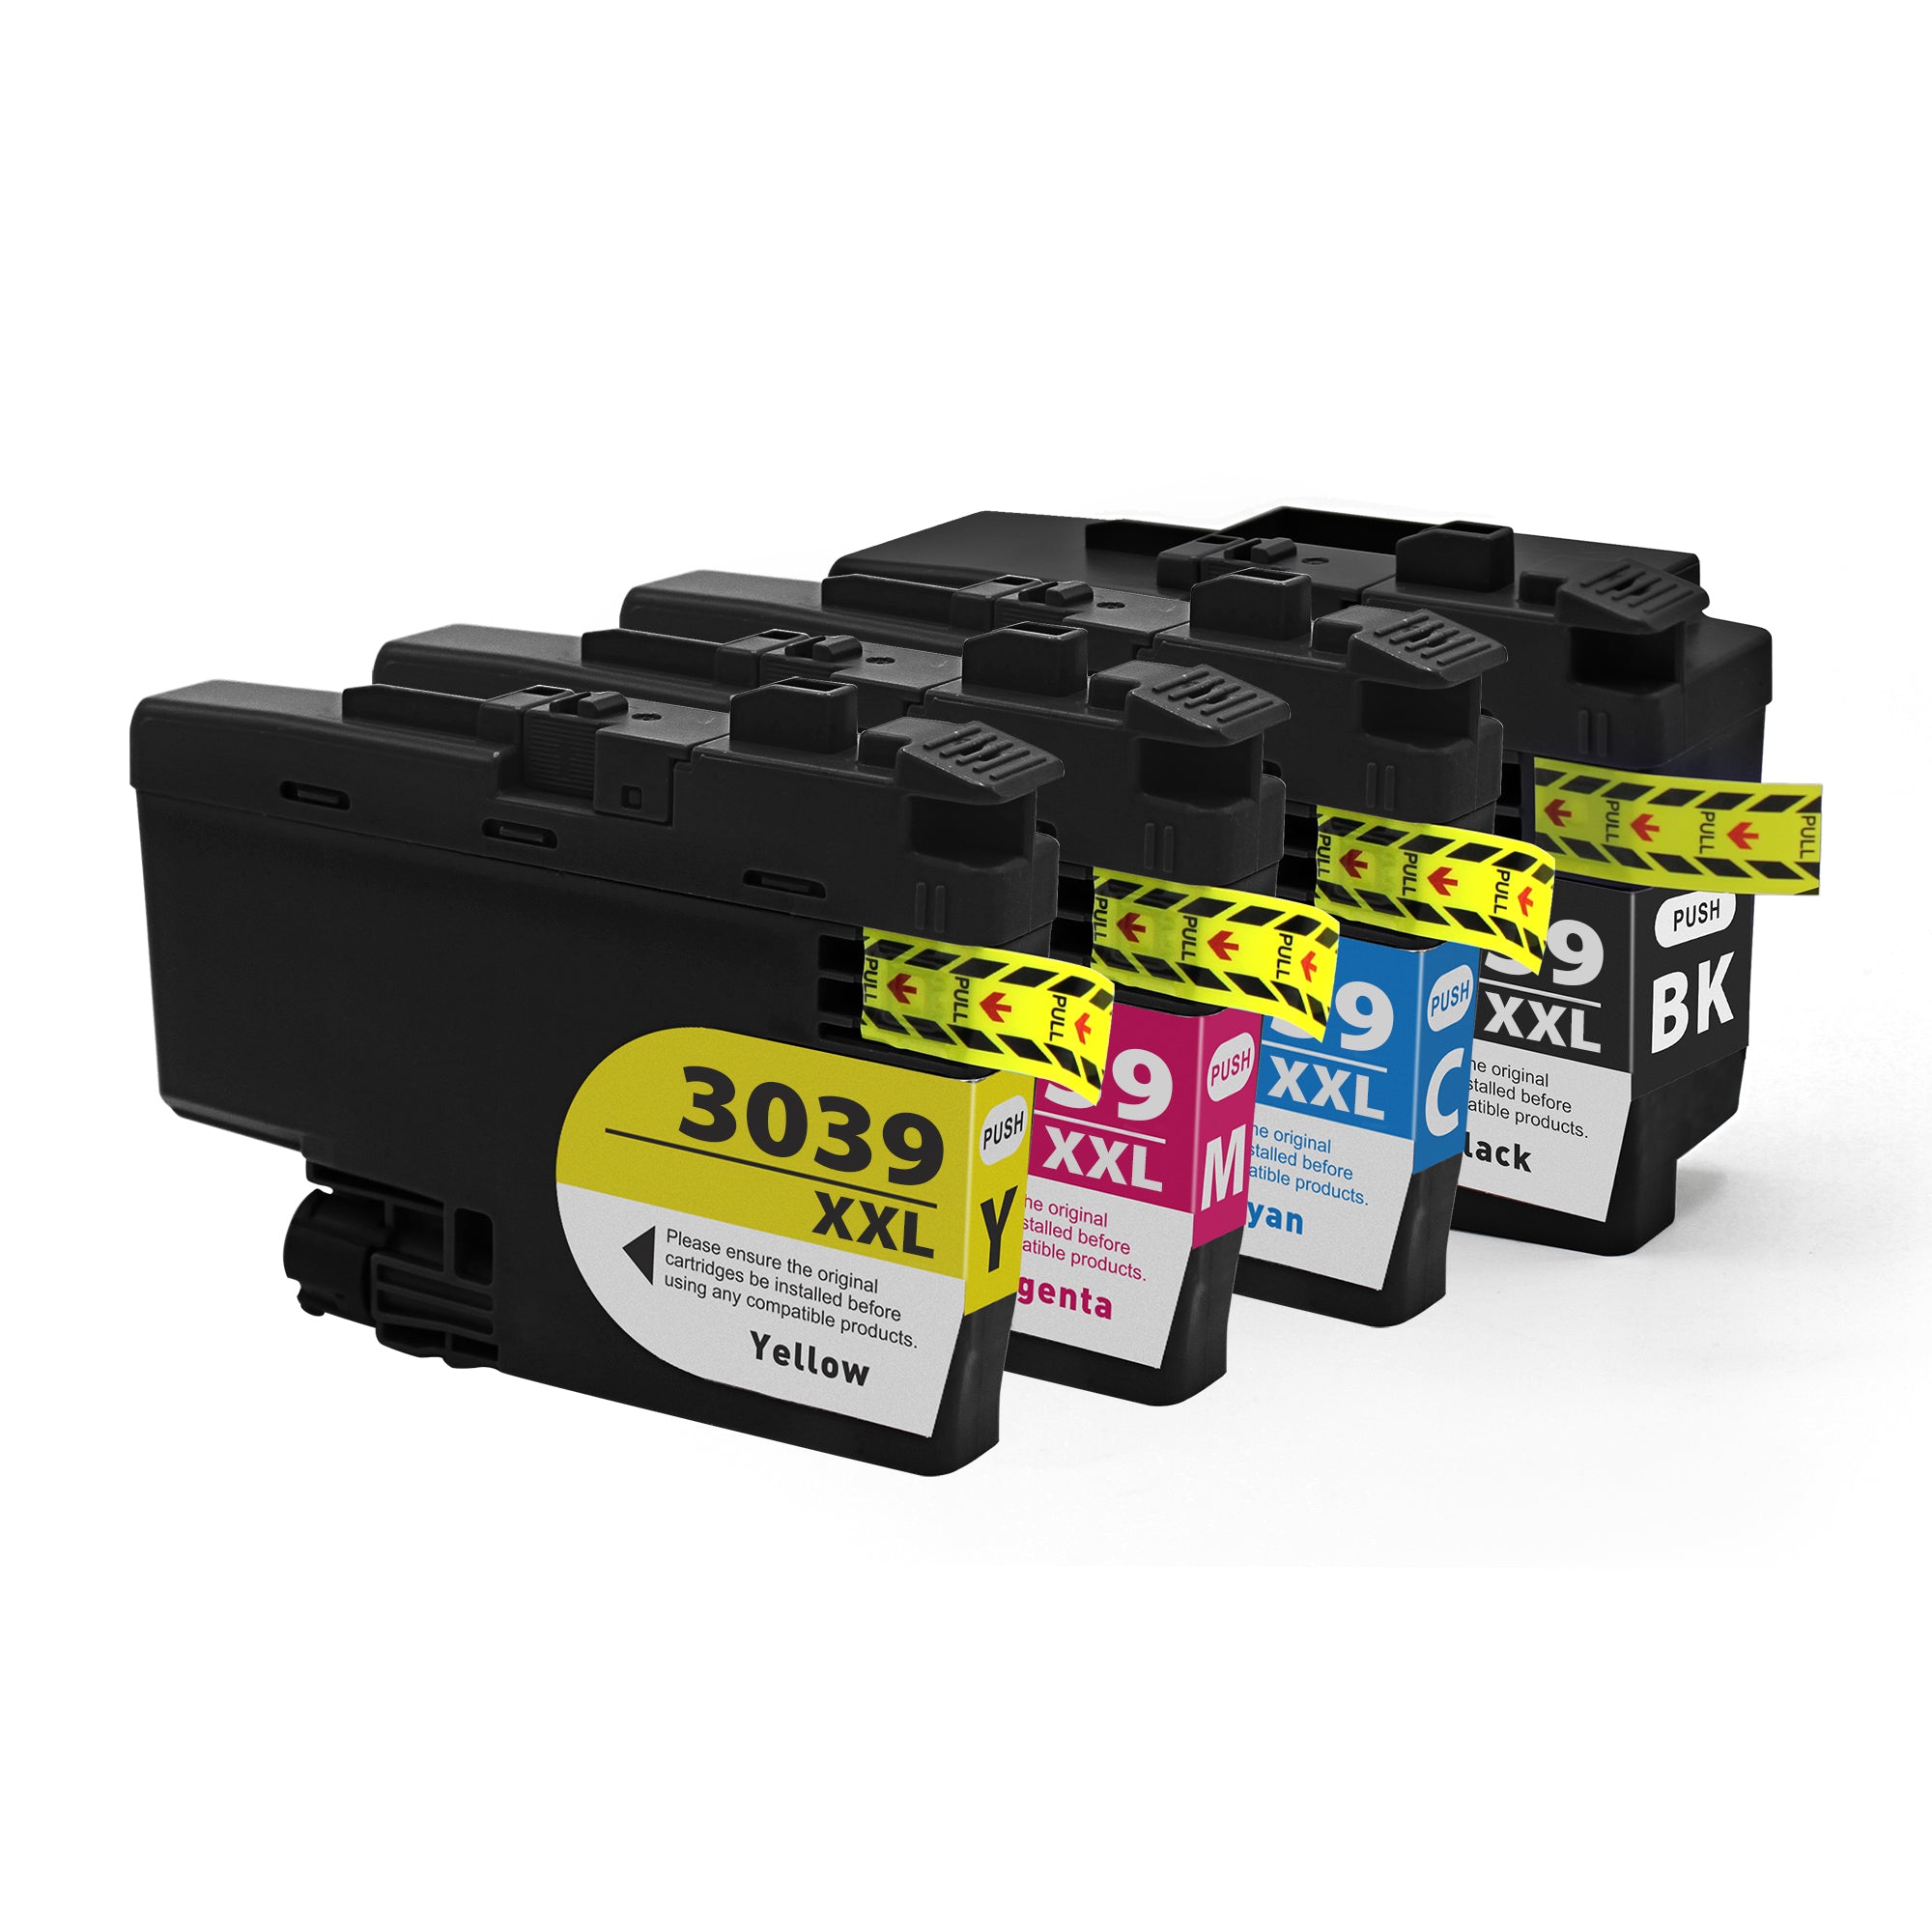 Compatible Brother LC3039 Ink Cartridge Combo Ultra High Yield BK/C/M/Y for use in MFC-J5845DW, MFC-J5845DW XL, MFC-J5945DW, MFC-J6545DW, MFC-J6545DW XL, MFC-J6945DW